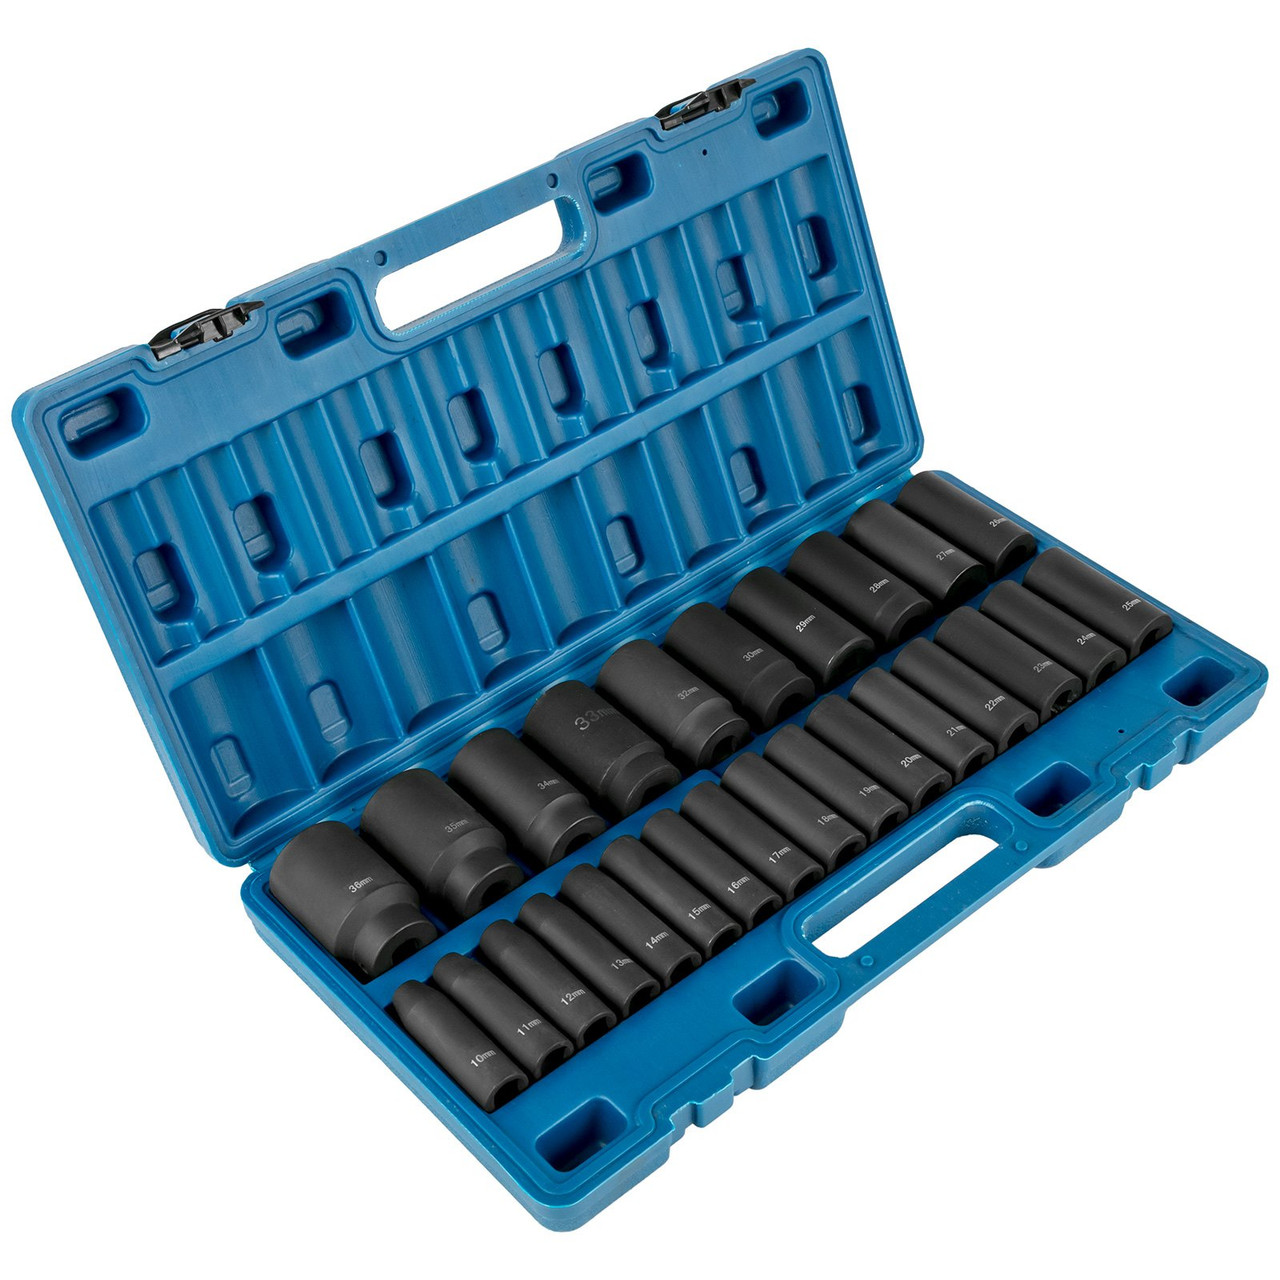 Impact Socket Set 1/2 Inches 26 Piece Impact Sockets, Deep Socket, 6-Point Sockets, Rugged Construction, Cr-V, 1/2 Inches Drive Socket Set Impact Metric 10mm - 36mm, with a Storage Cage